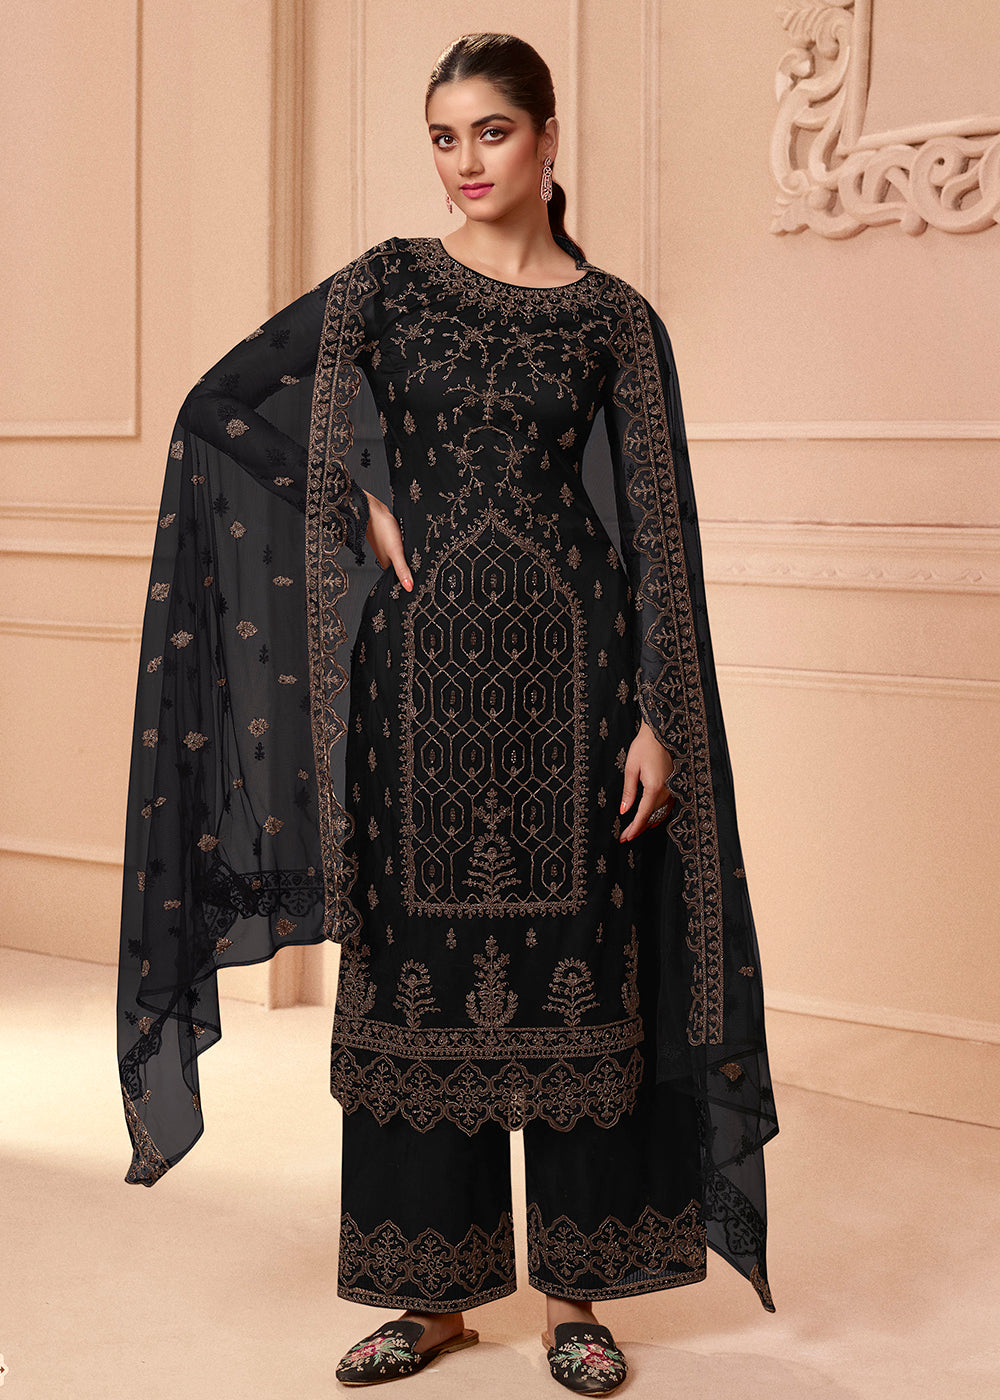 Buy Now Pant Style Classy Black Embroidered Wedding Salwar Suit Online in USA, UK, Canada & Worldwide at Empress Clothing.